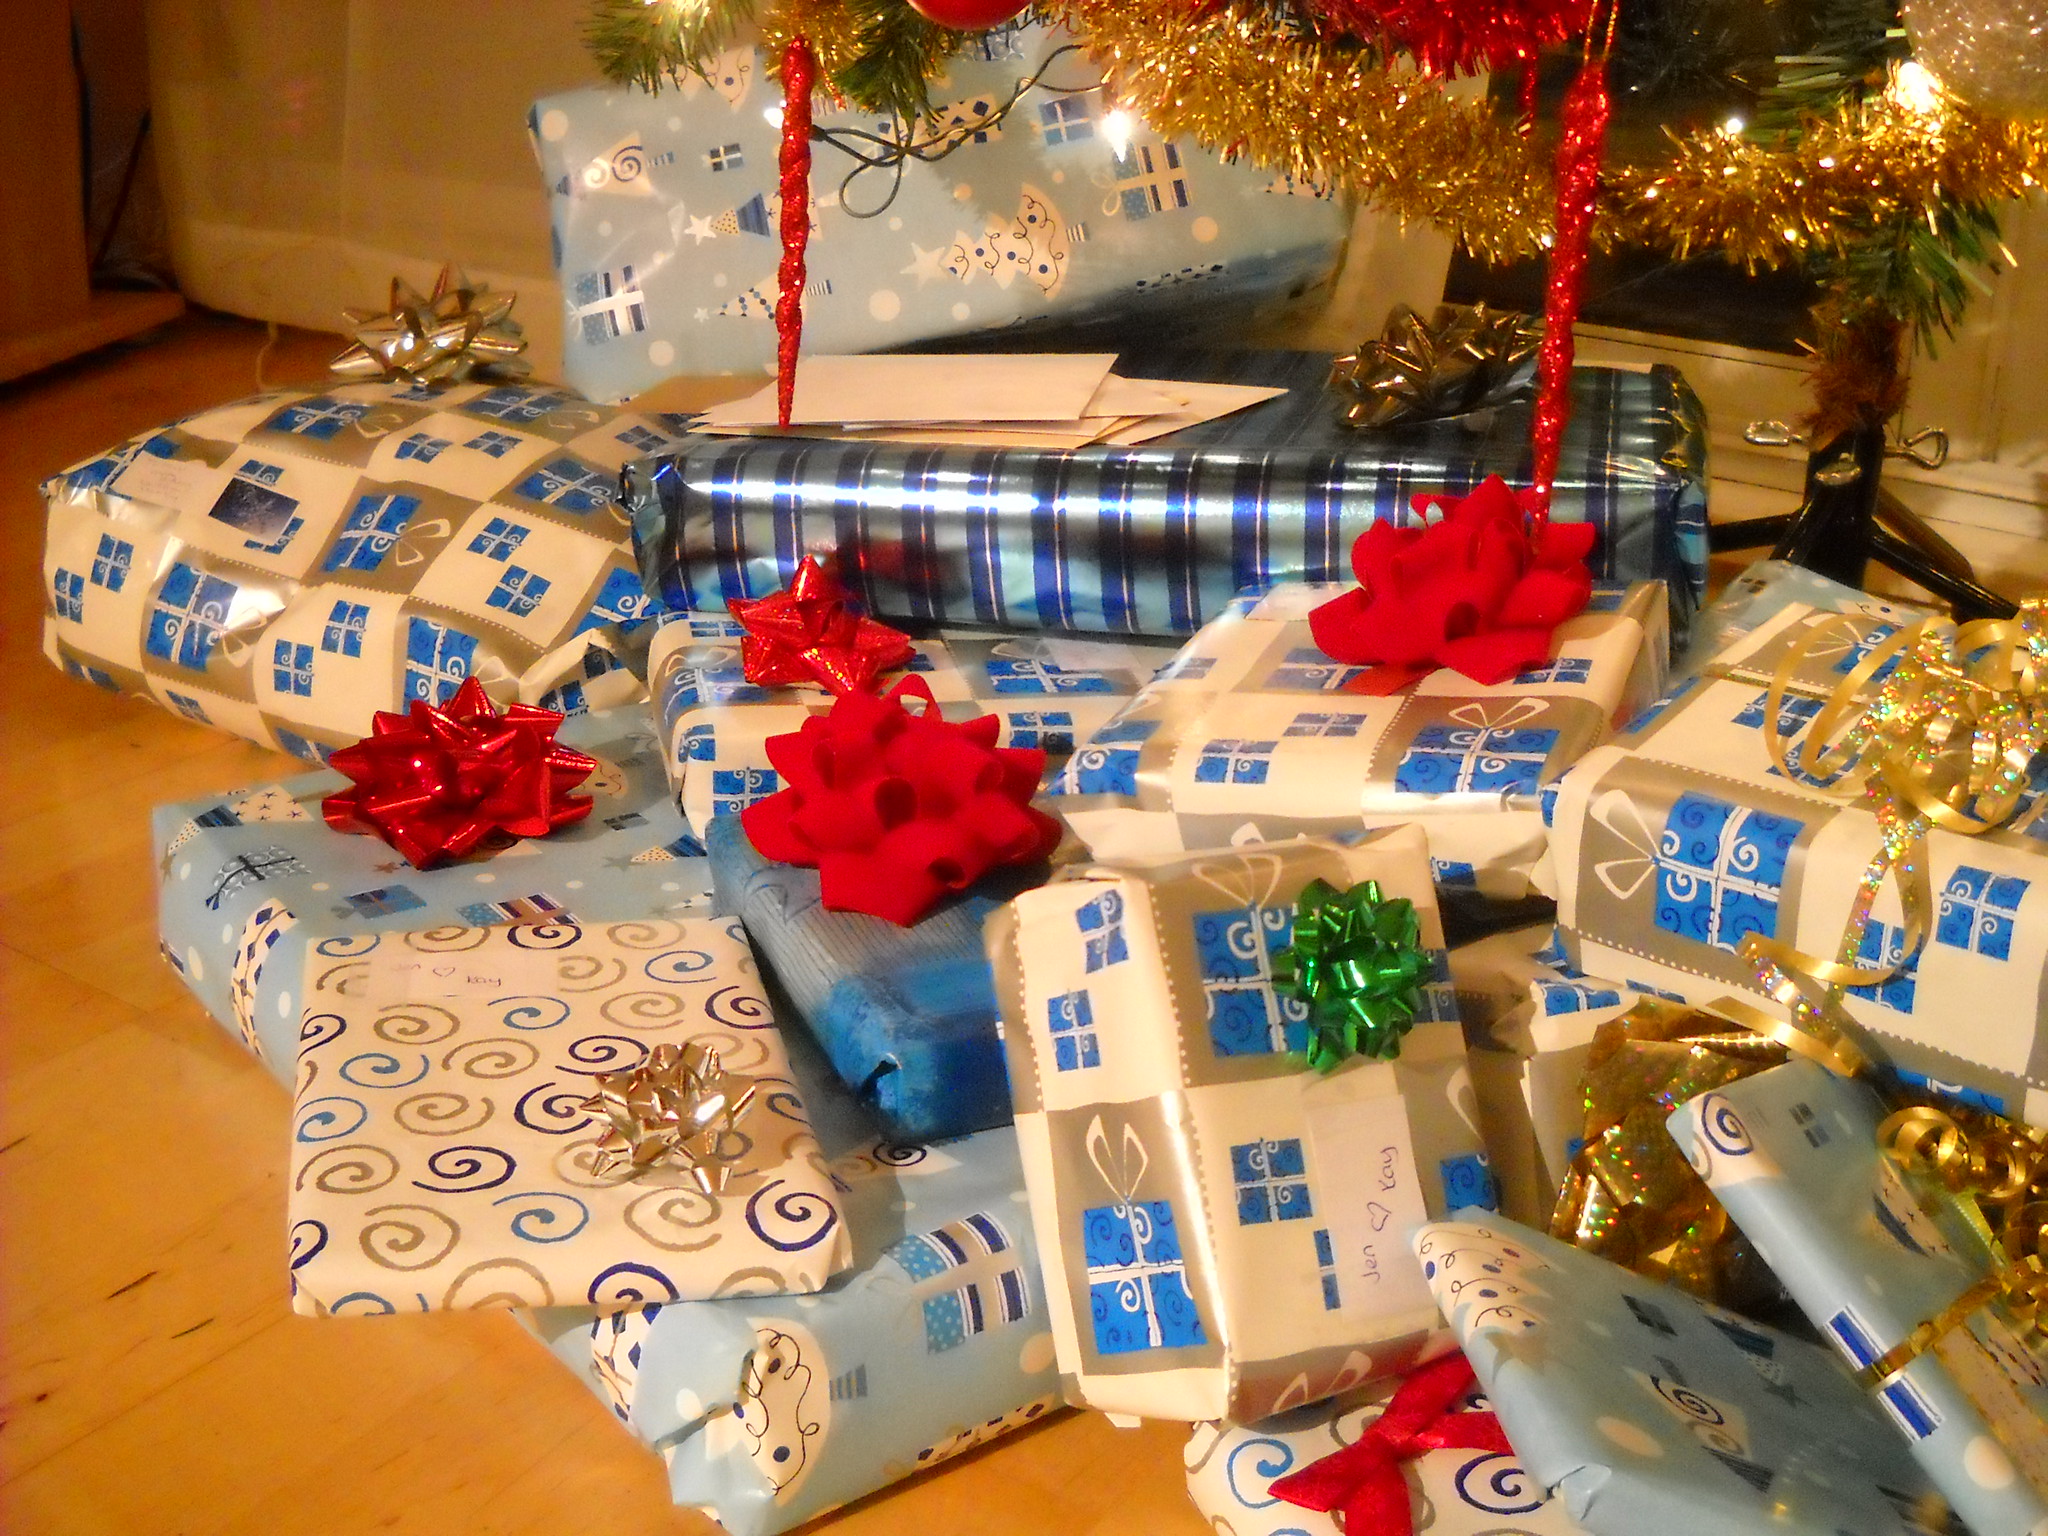 Neatly wrapped Christmas presents | Source: Flickr